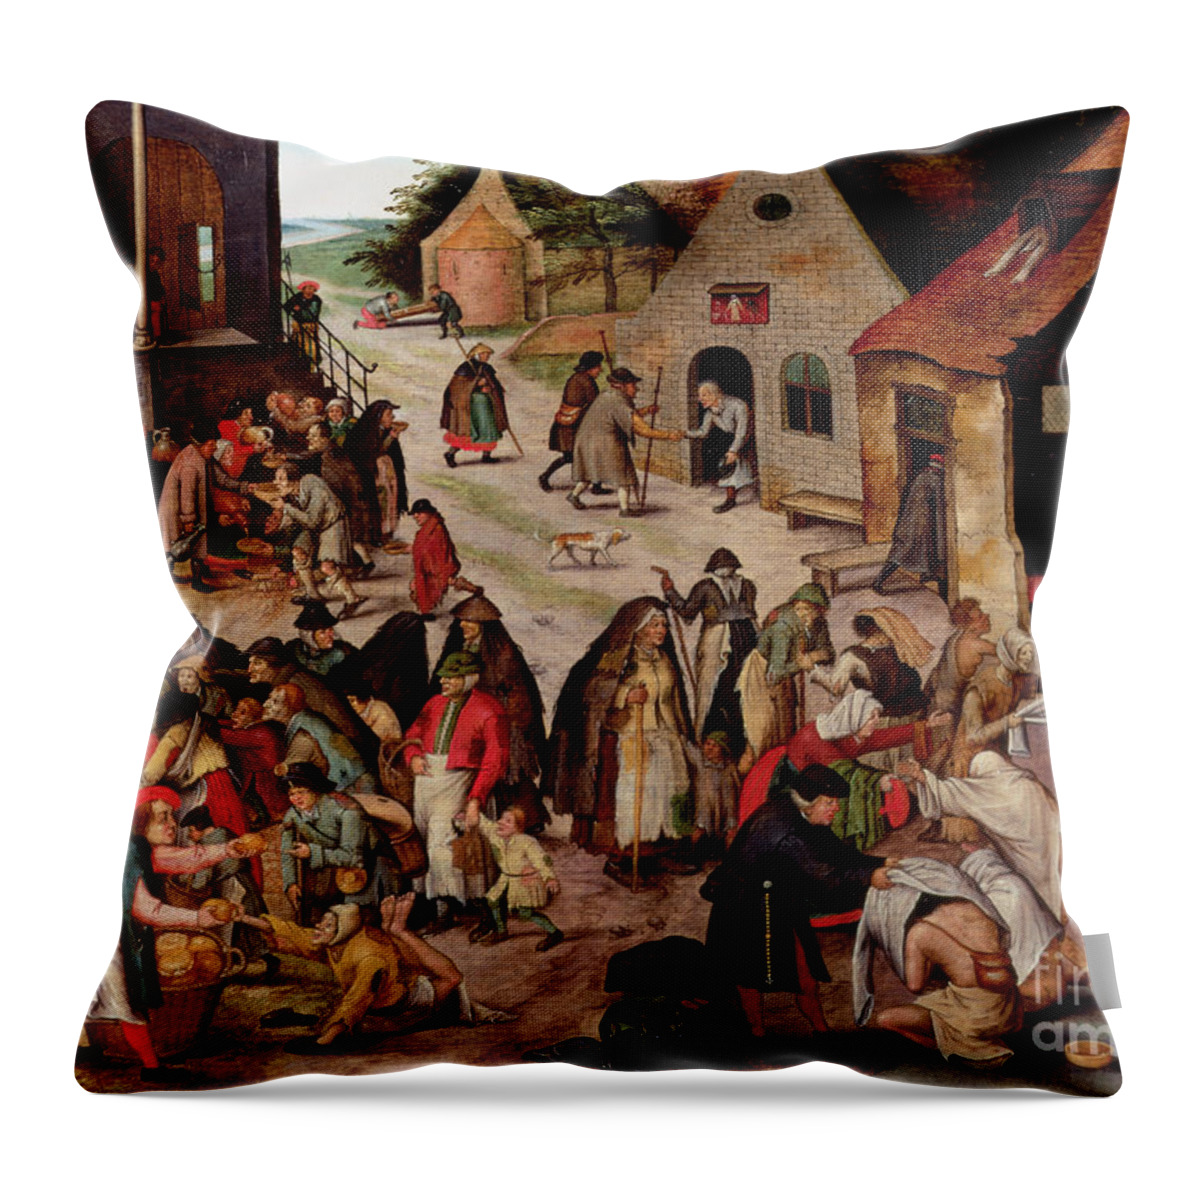 Art Throw Pillow featuring the painting The Seven Acts Of Charity by Pieter The Younger Brueghel